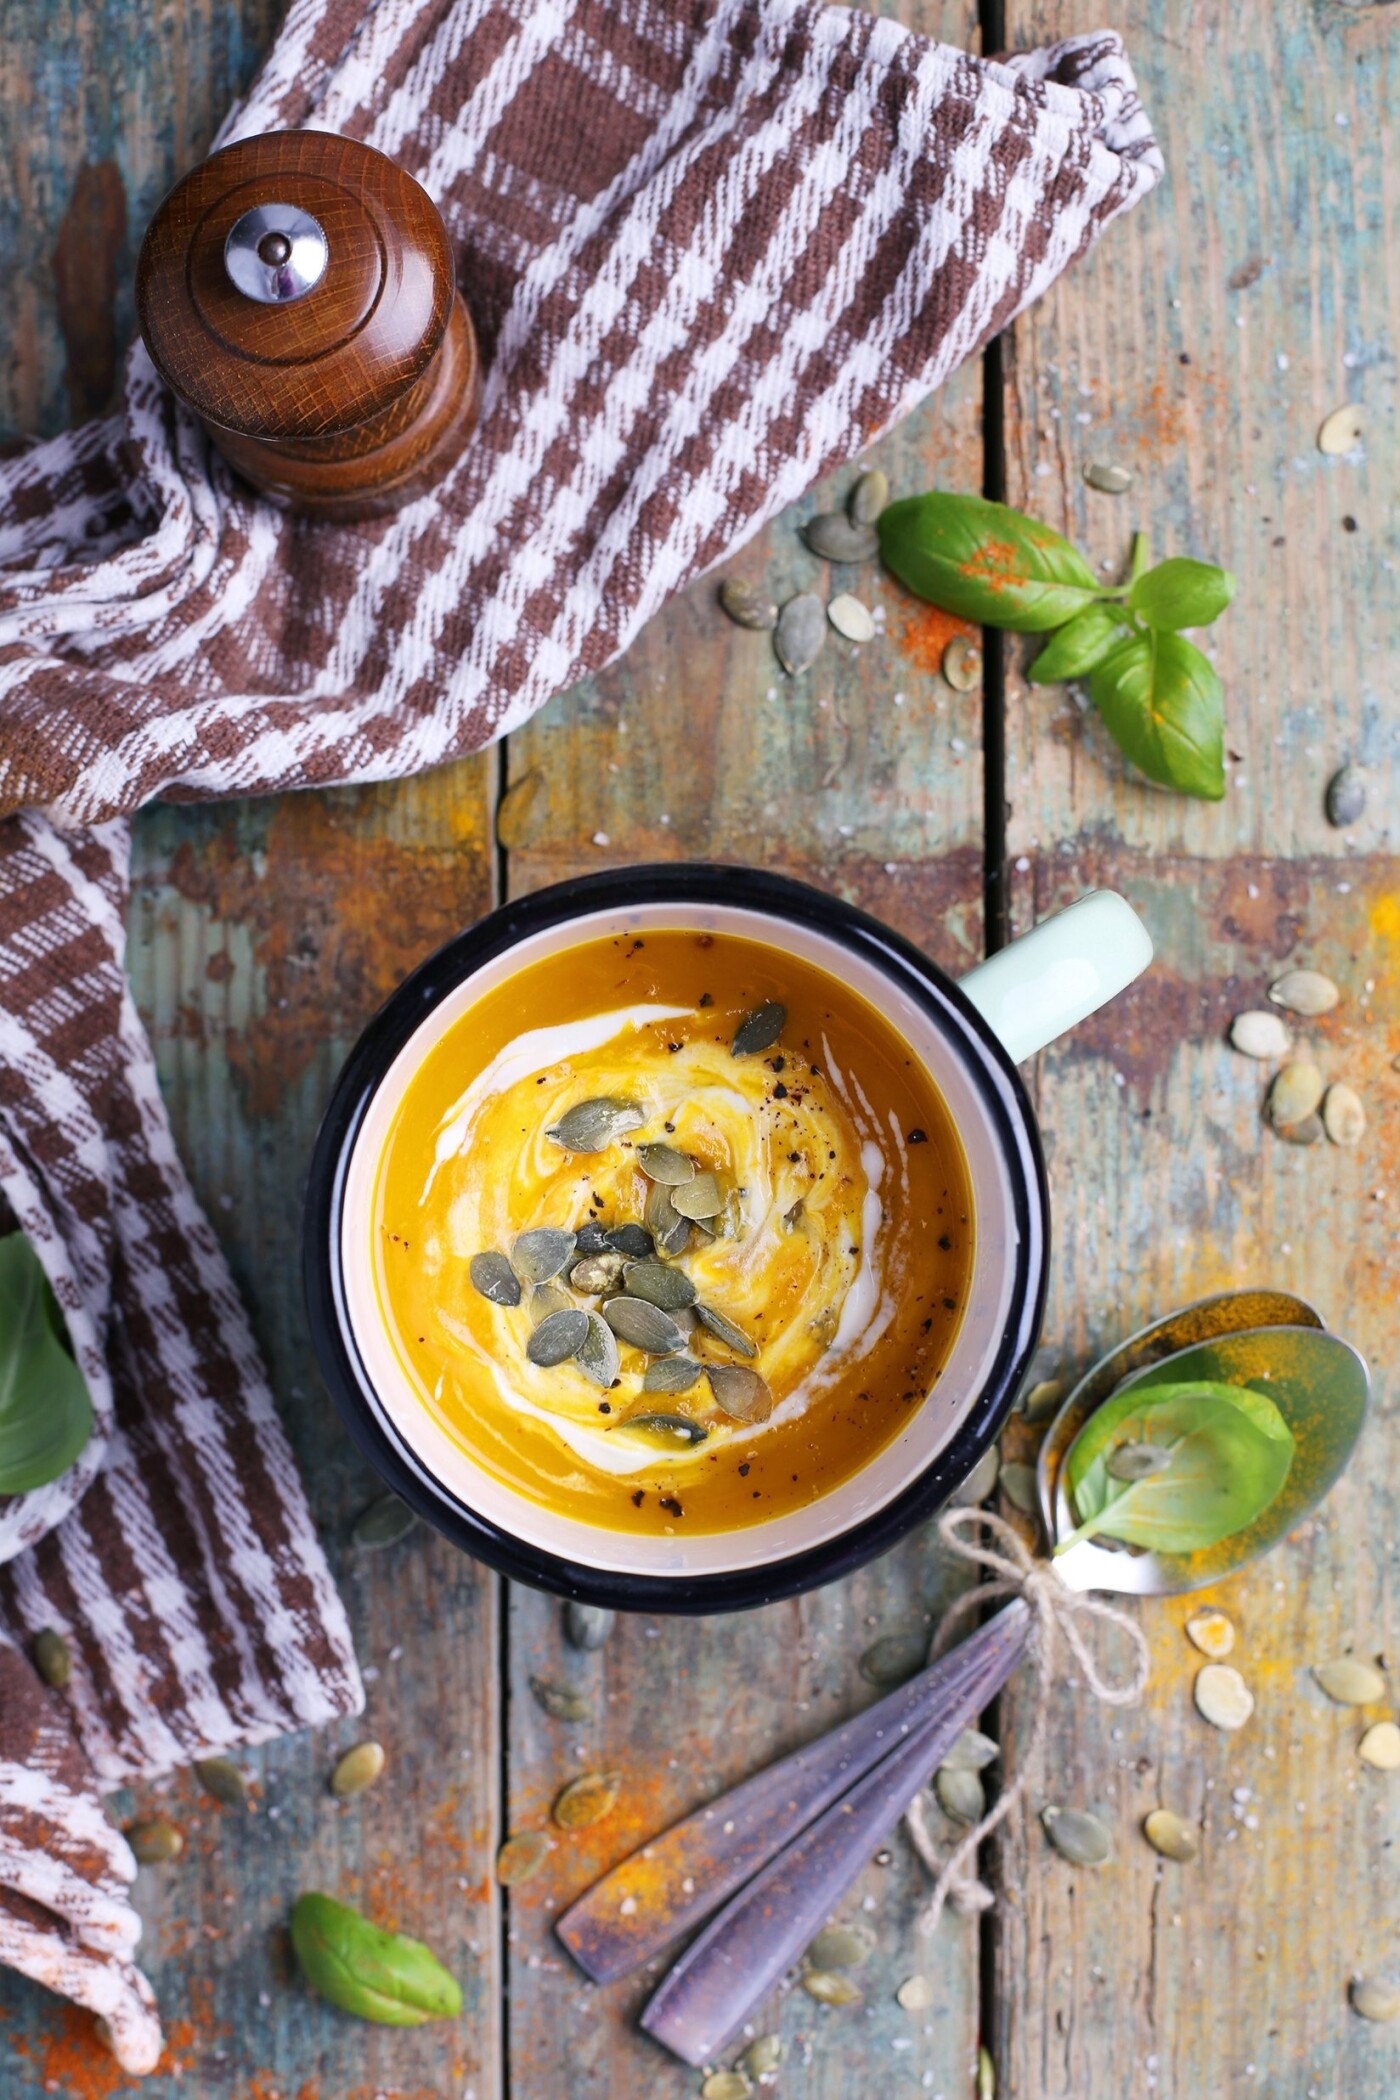 Pumpkin soup - the picture was taken for the British Vegan Food and Living magazine. The idea was to make it simple and natural. And to make the readers hungry!